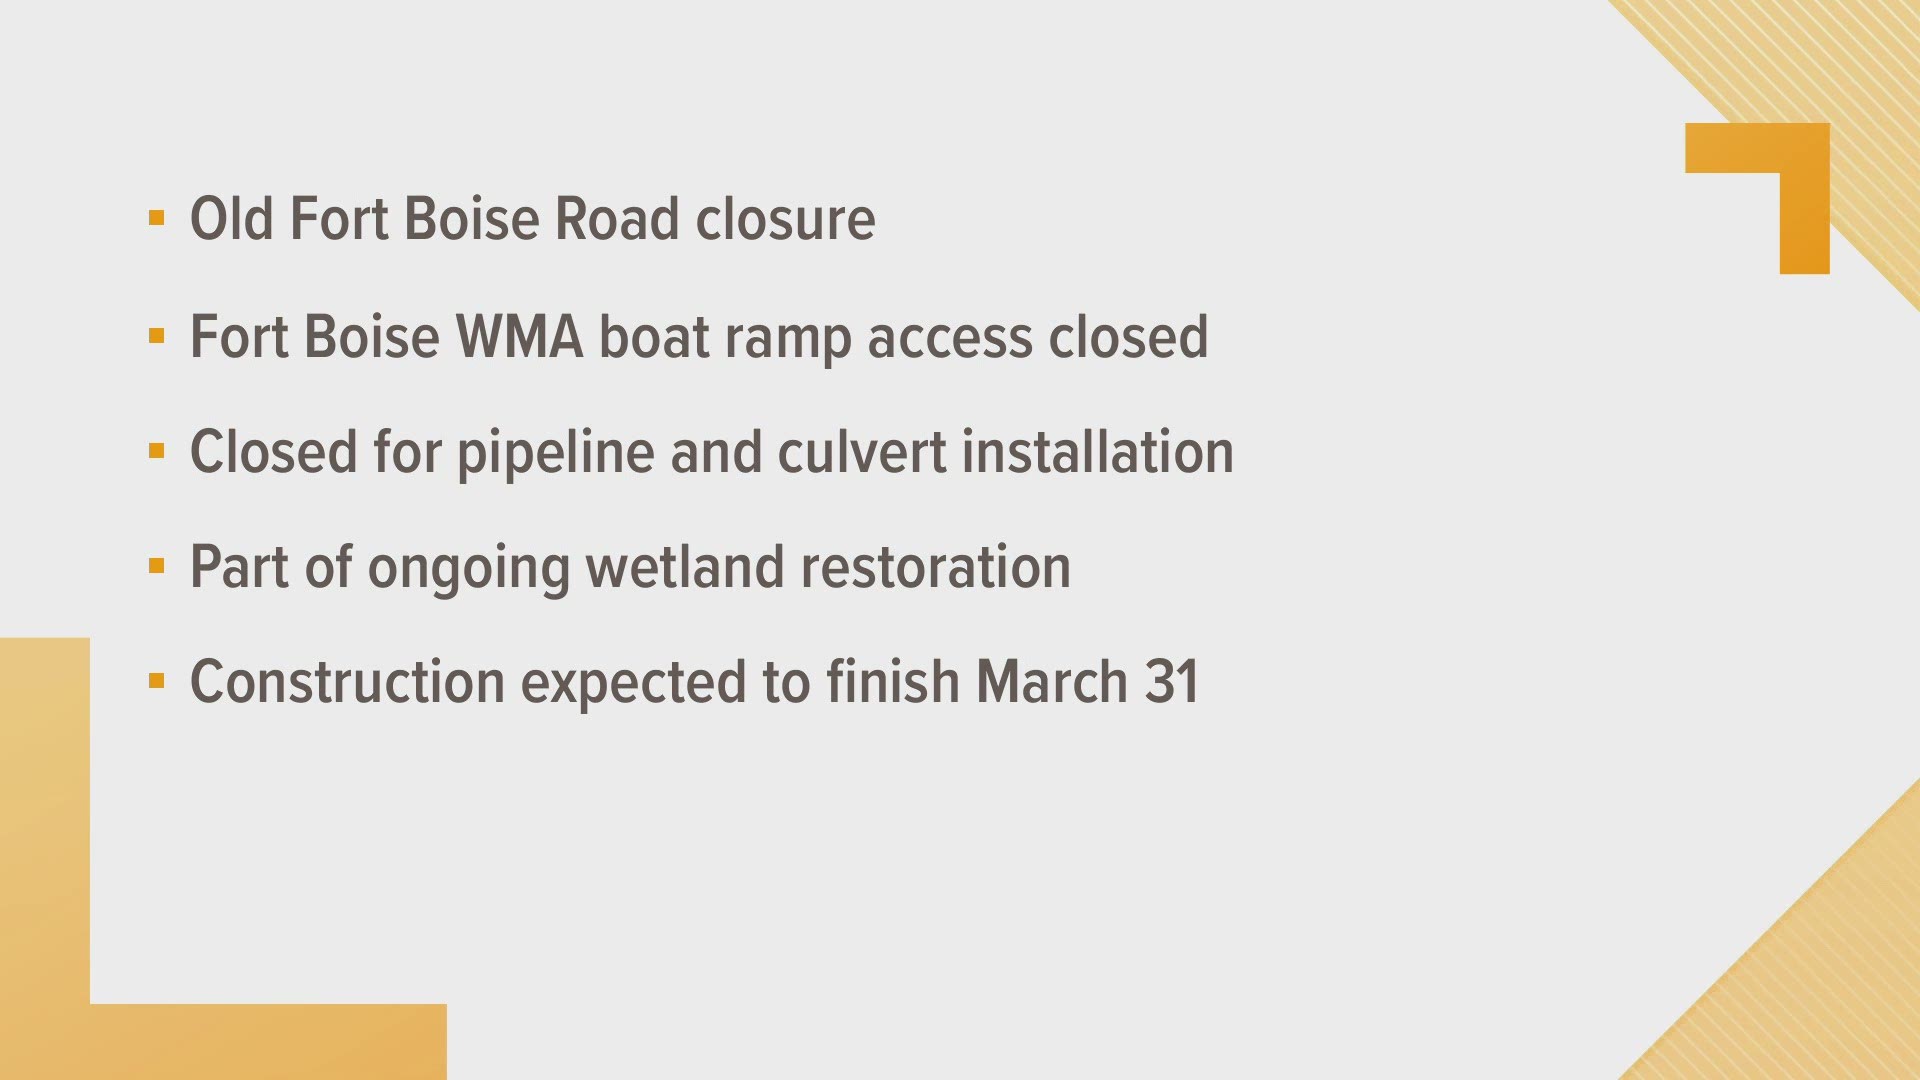 The project is part of ongoing wetland restoration efforts at Fort Boise WMA.